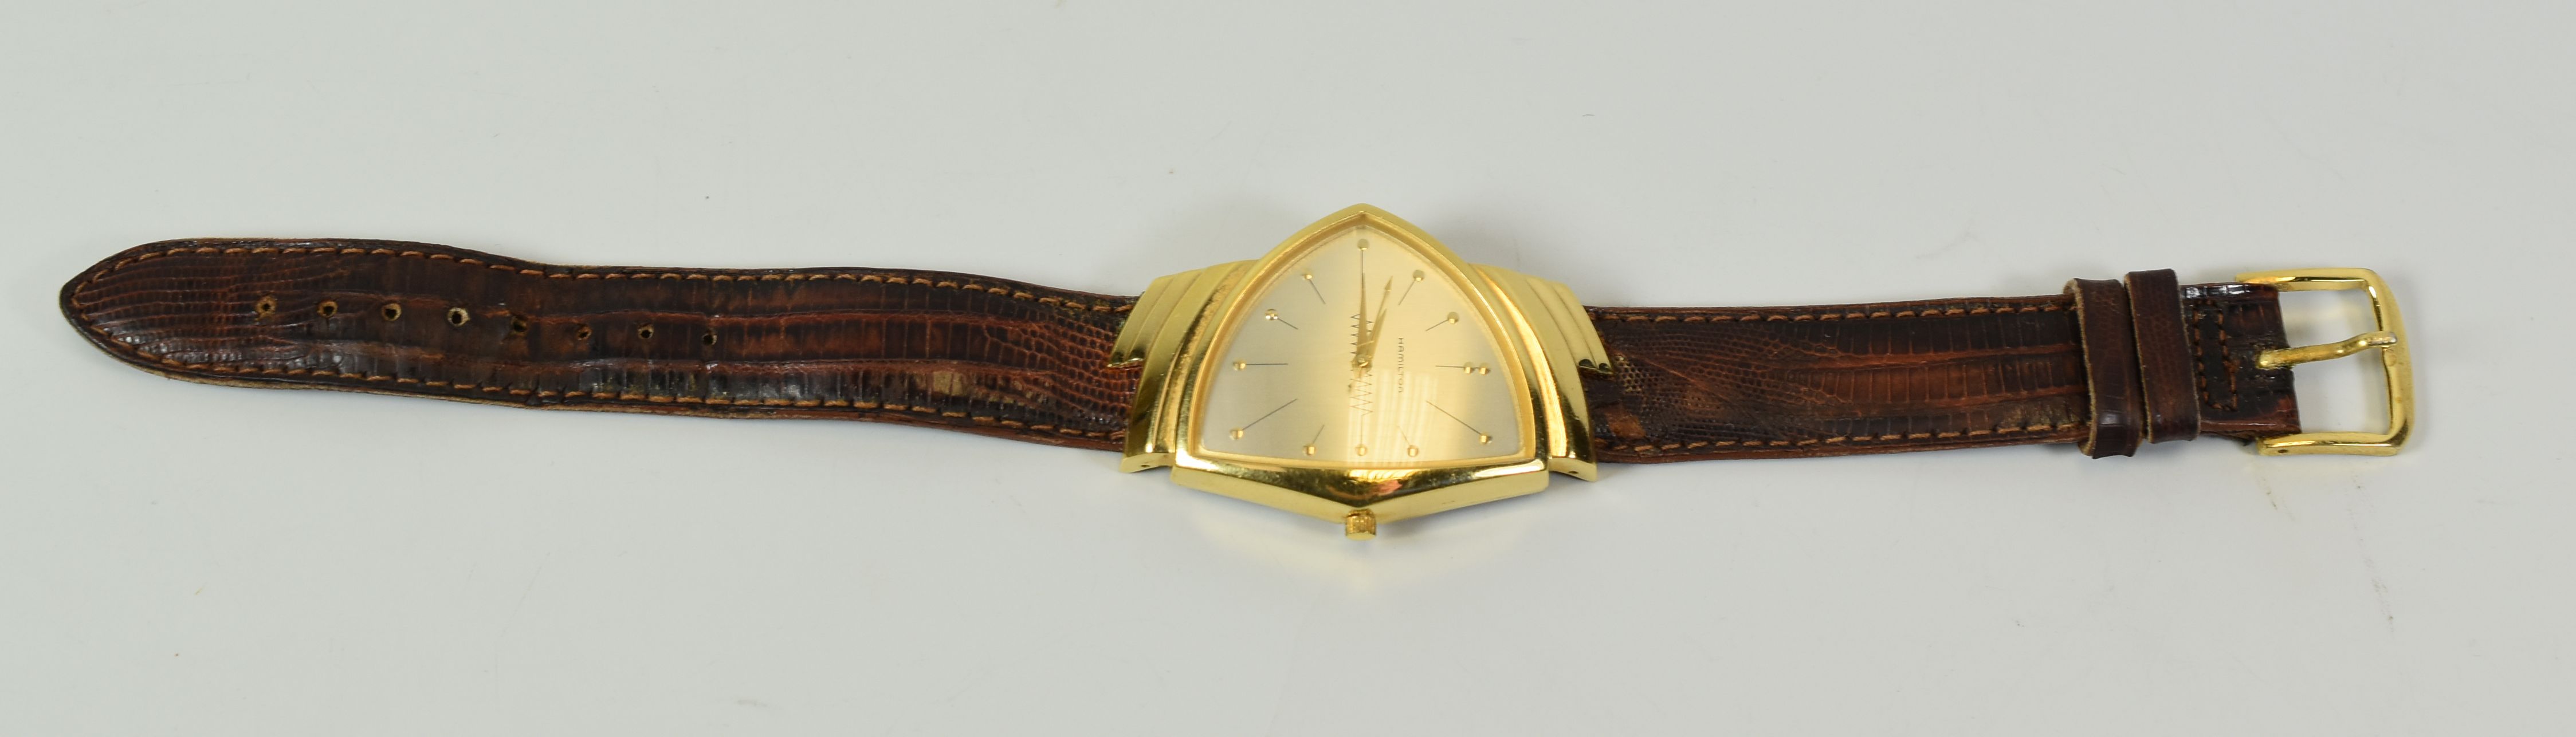 AN AMERICAN HAMILTON AUTOMATIC WRISTWATCH of 'space-age design' having an unusually shaped dial in